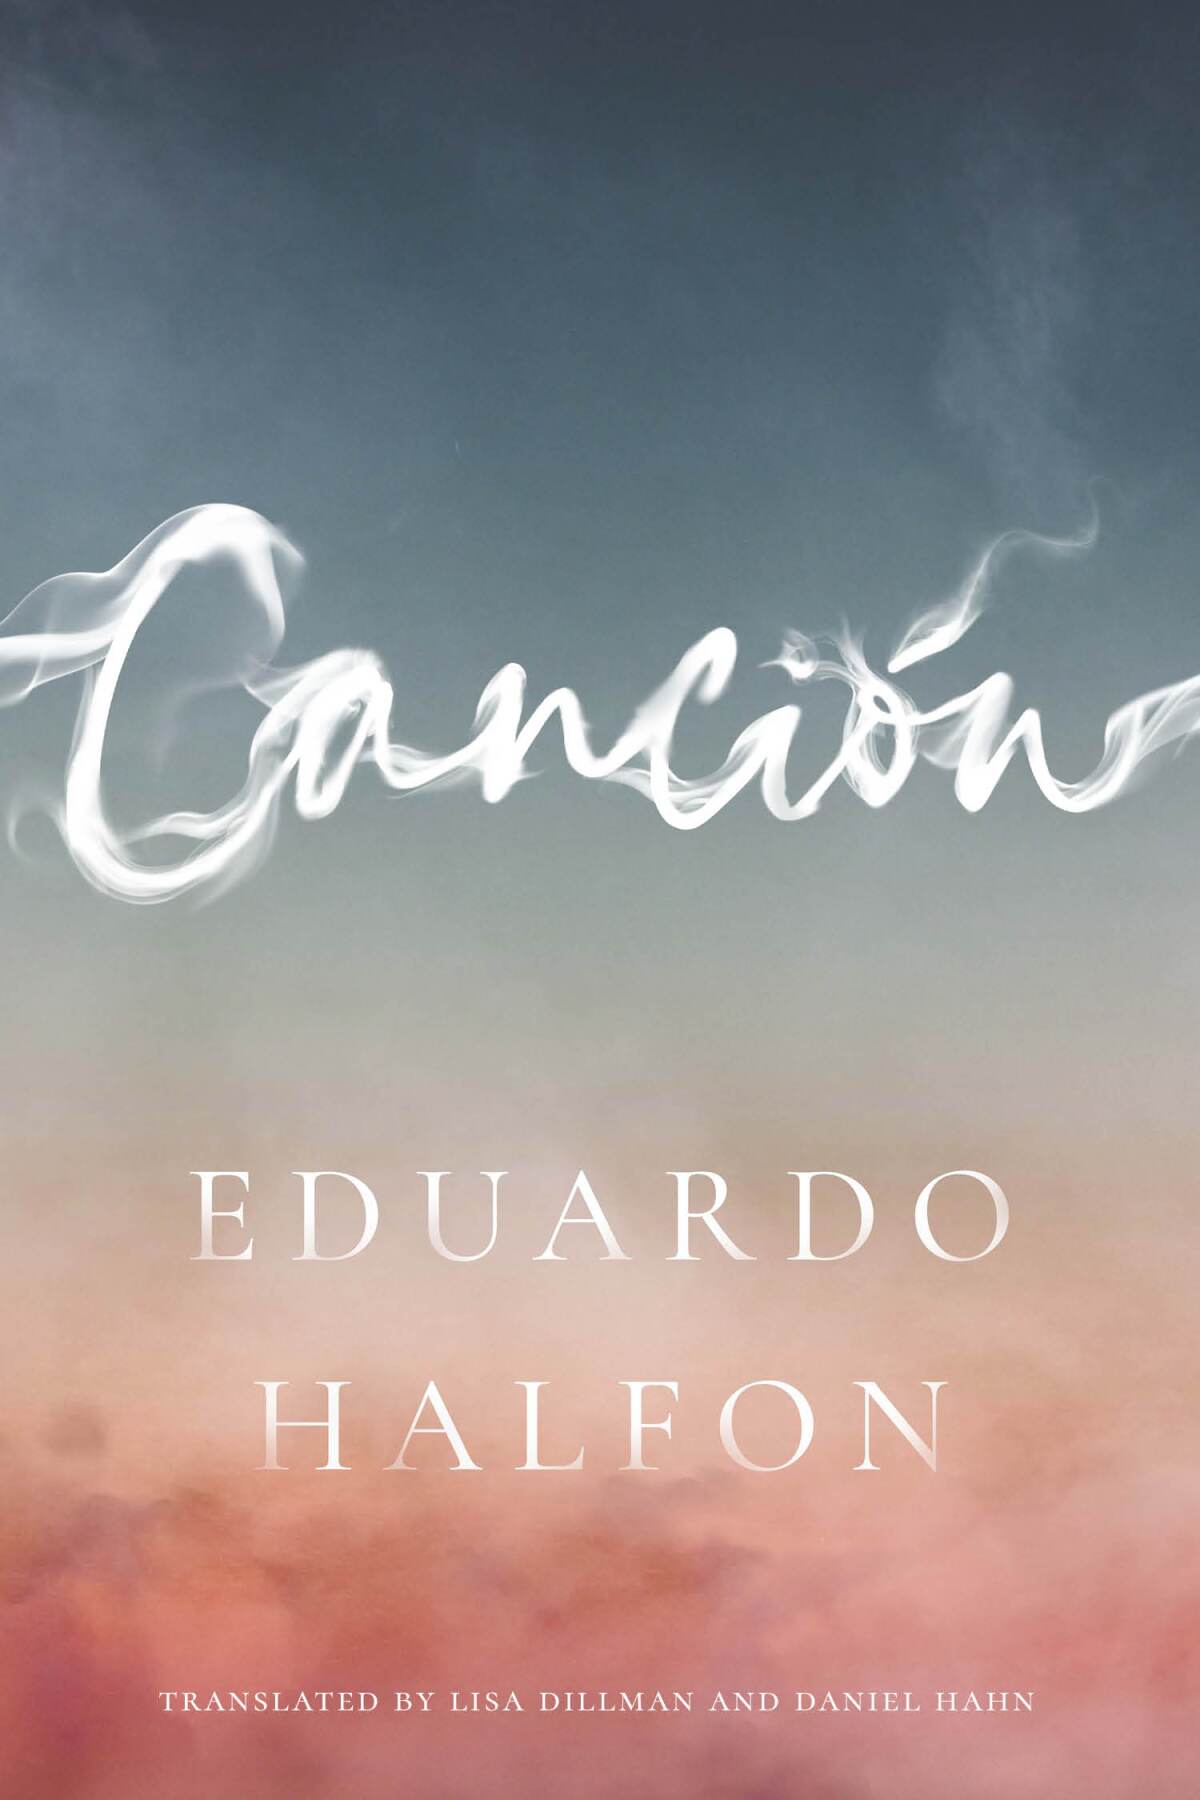 The book cover of "Cancion," by Eduard Halfon.